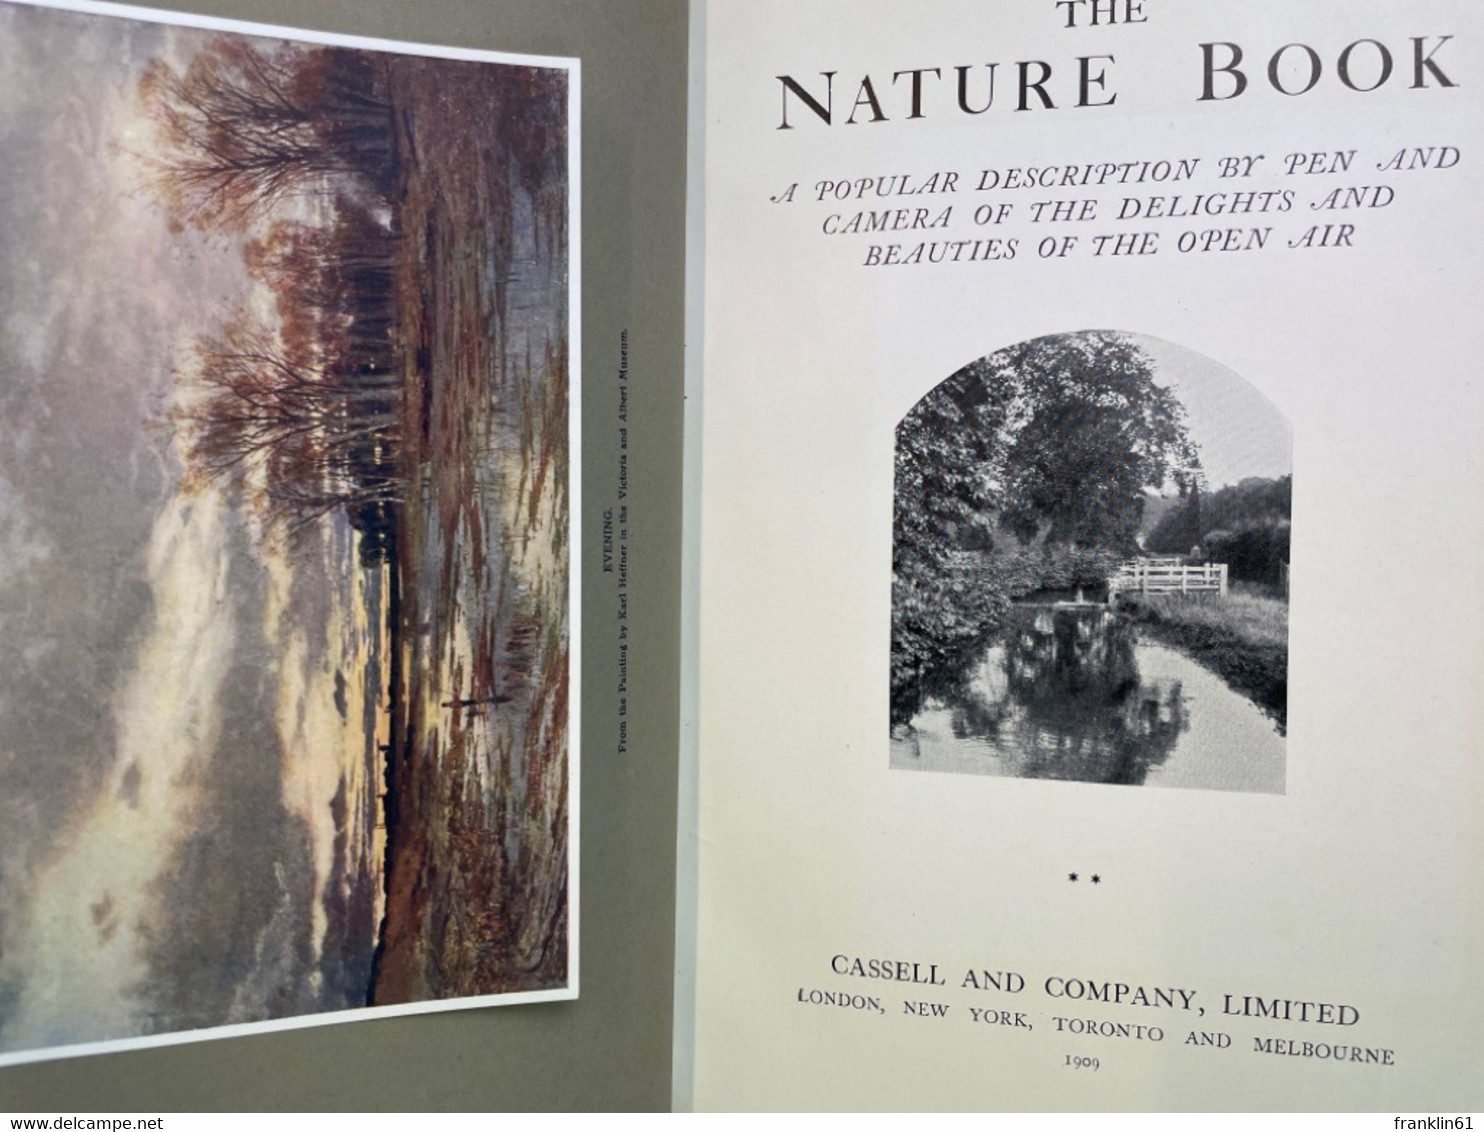 The Nature Book - A Popular Description by Pen and Camera of the Delights and Beauties of the Open Air. VOL.1